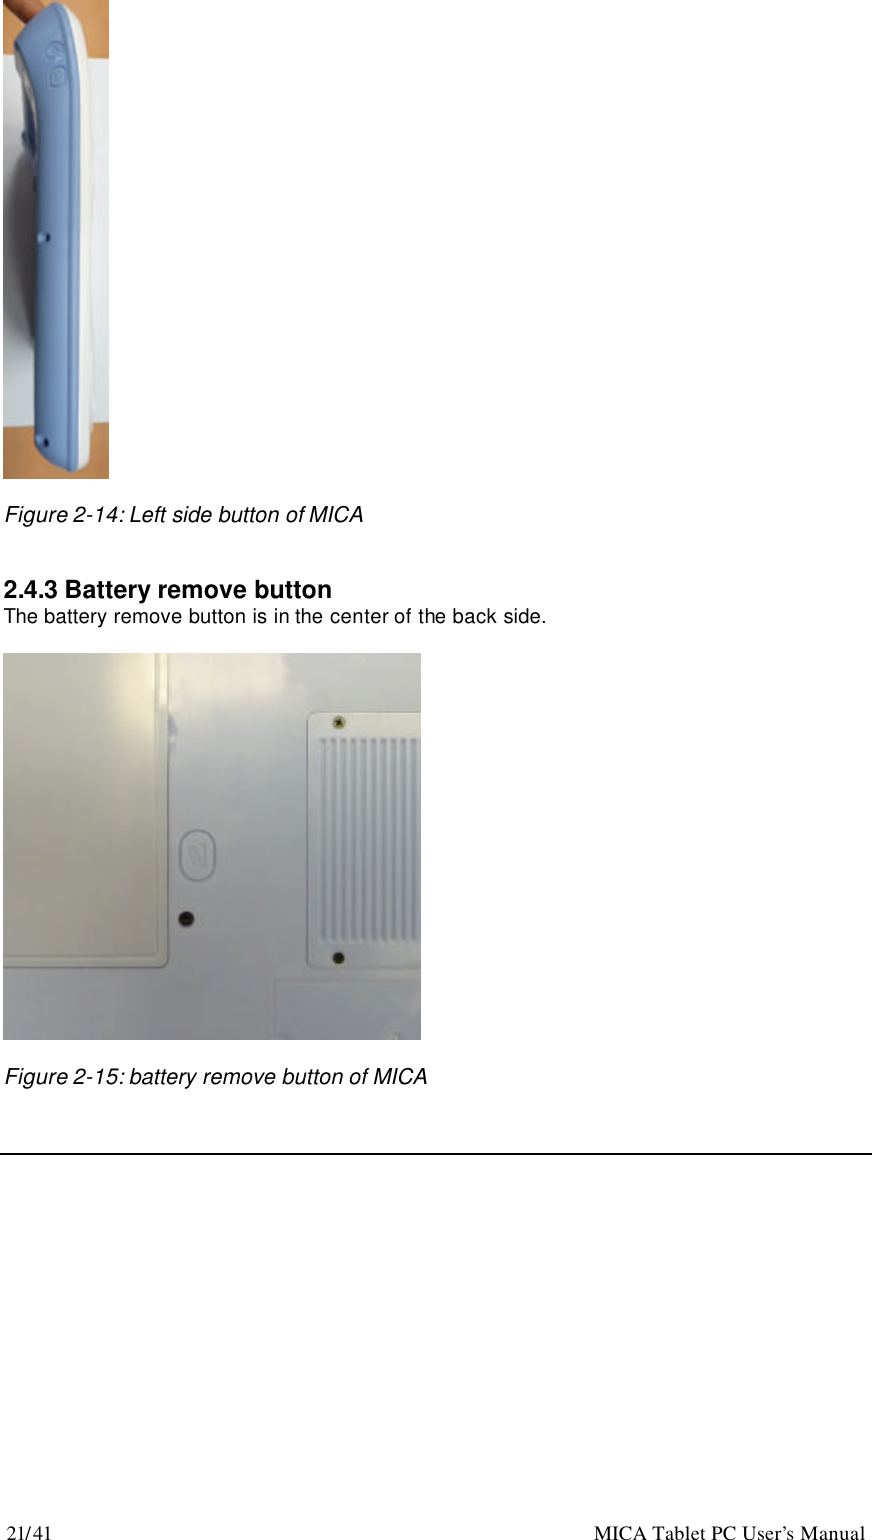 21/41                                                    MICA Tablet PC User’s Manual   Figure 2-14: Left side button of MICA   2.4.3 Battery remove button   The battery remove button is in the center of the back side.    Figure 2-15: battery remove button of MICA      